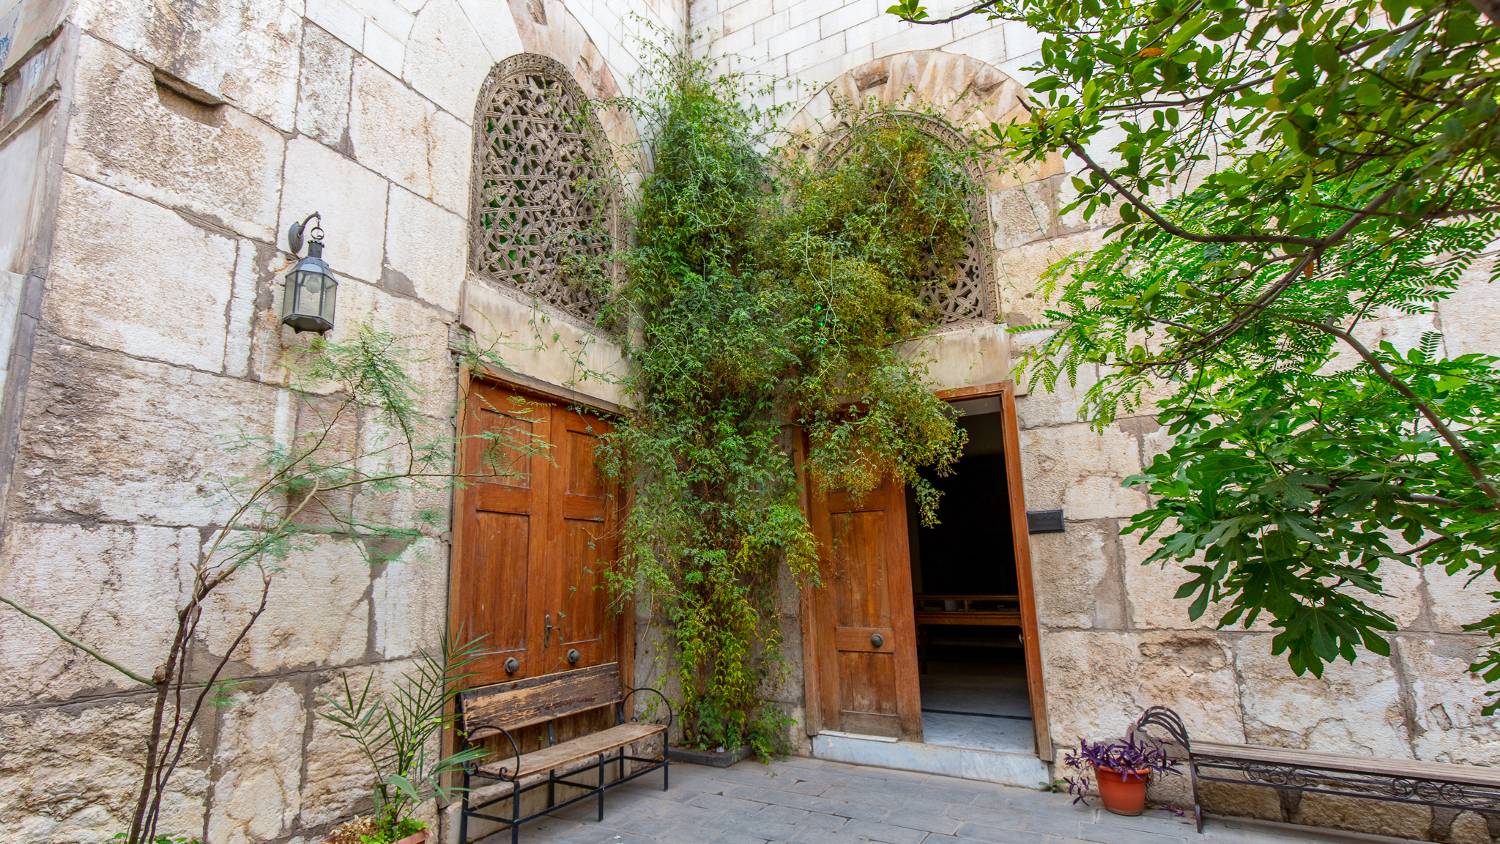 Founded 1154 AD and in use until the 20th century, Nur al-Din Zangi's bimaristan includes a central fountain and a garden with separate rooms for the treatment of different ailments (Zirrar Ali)